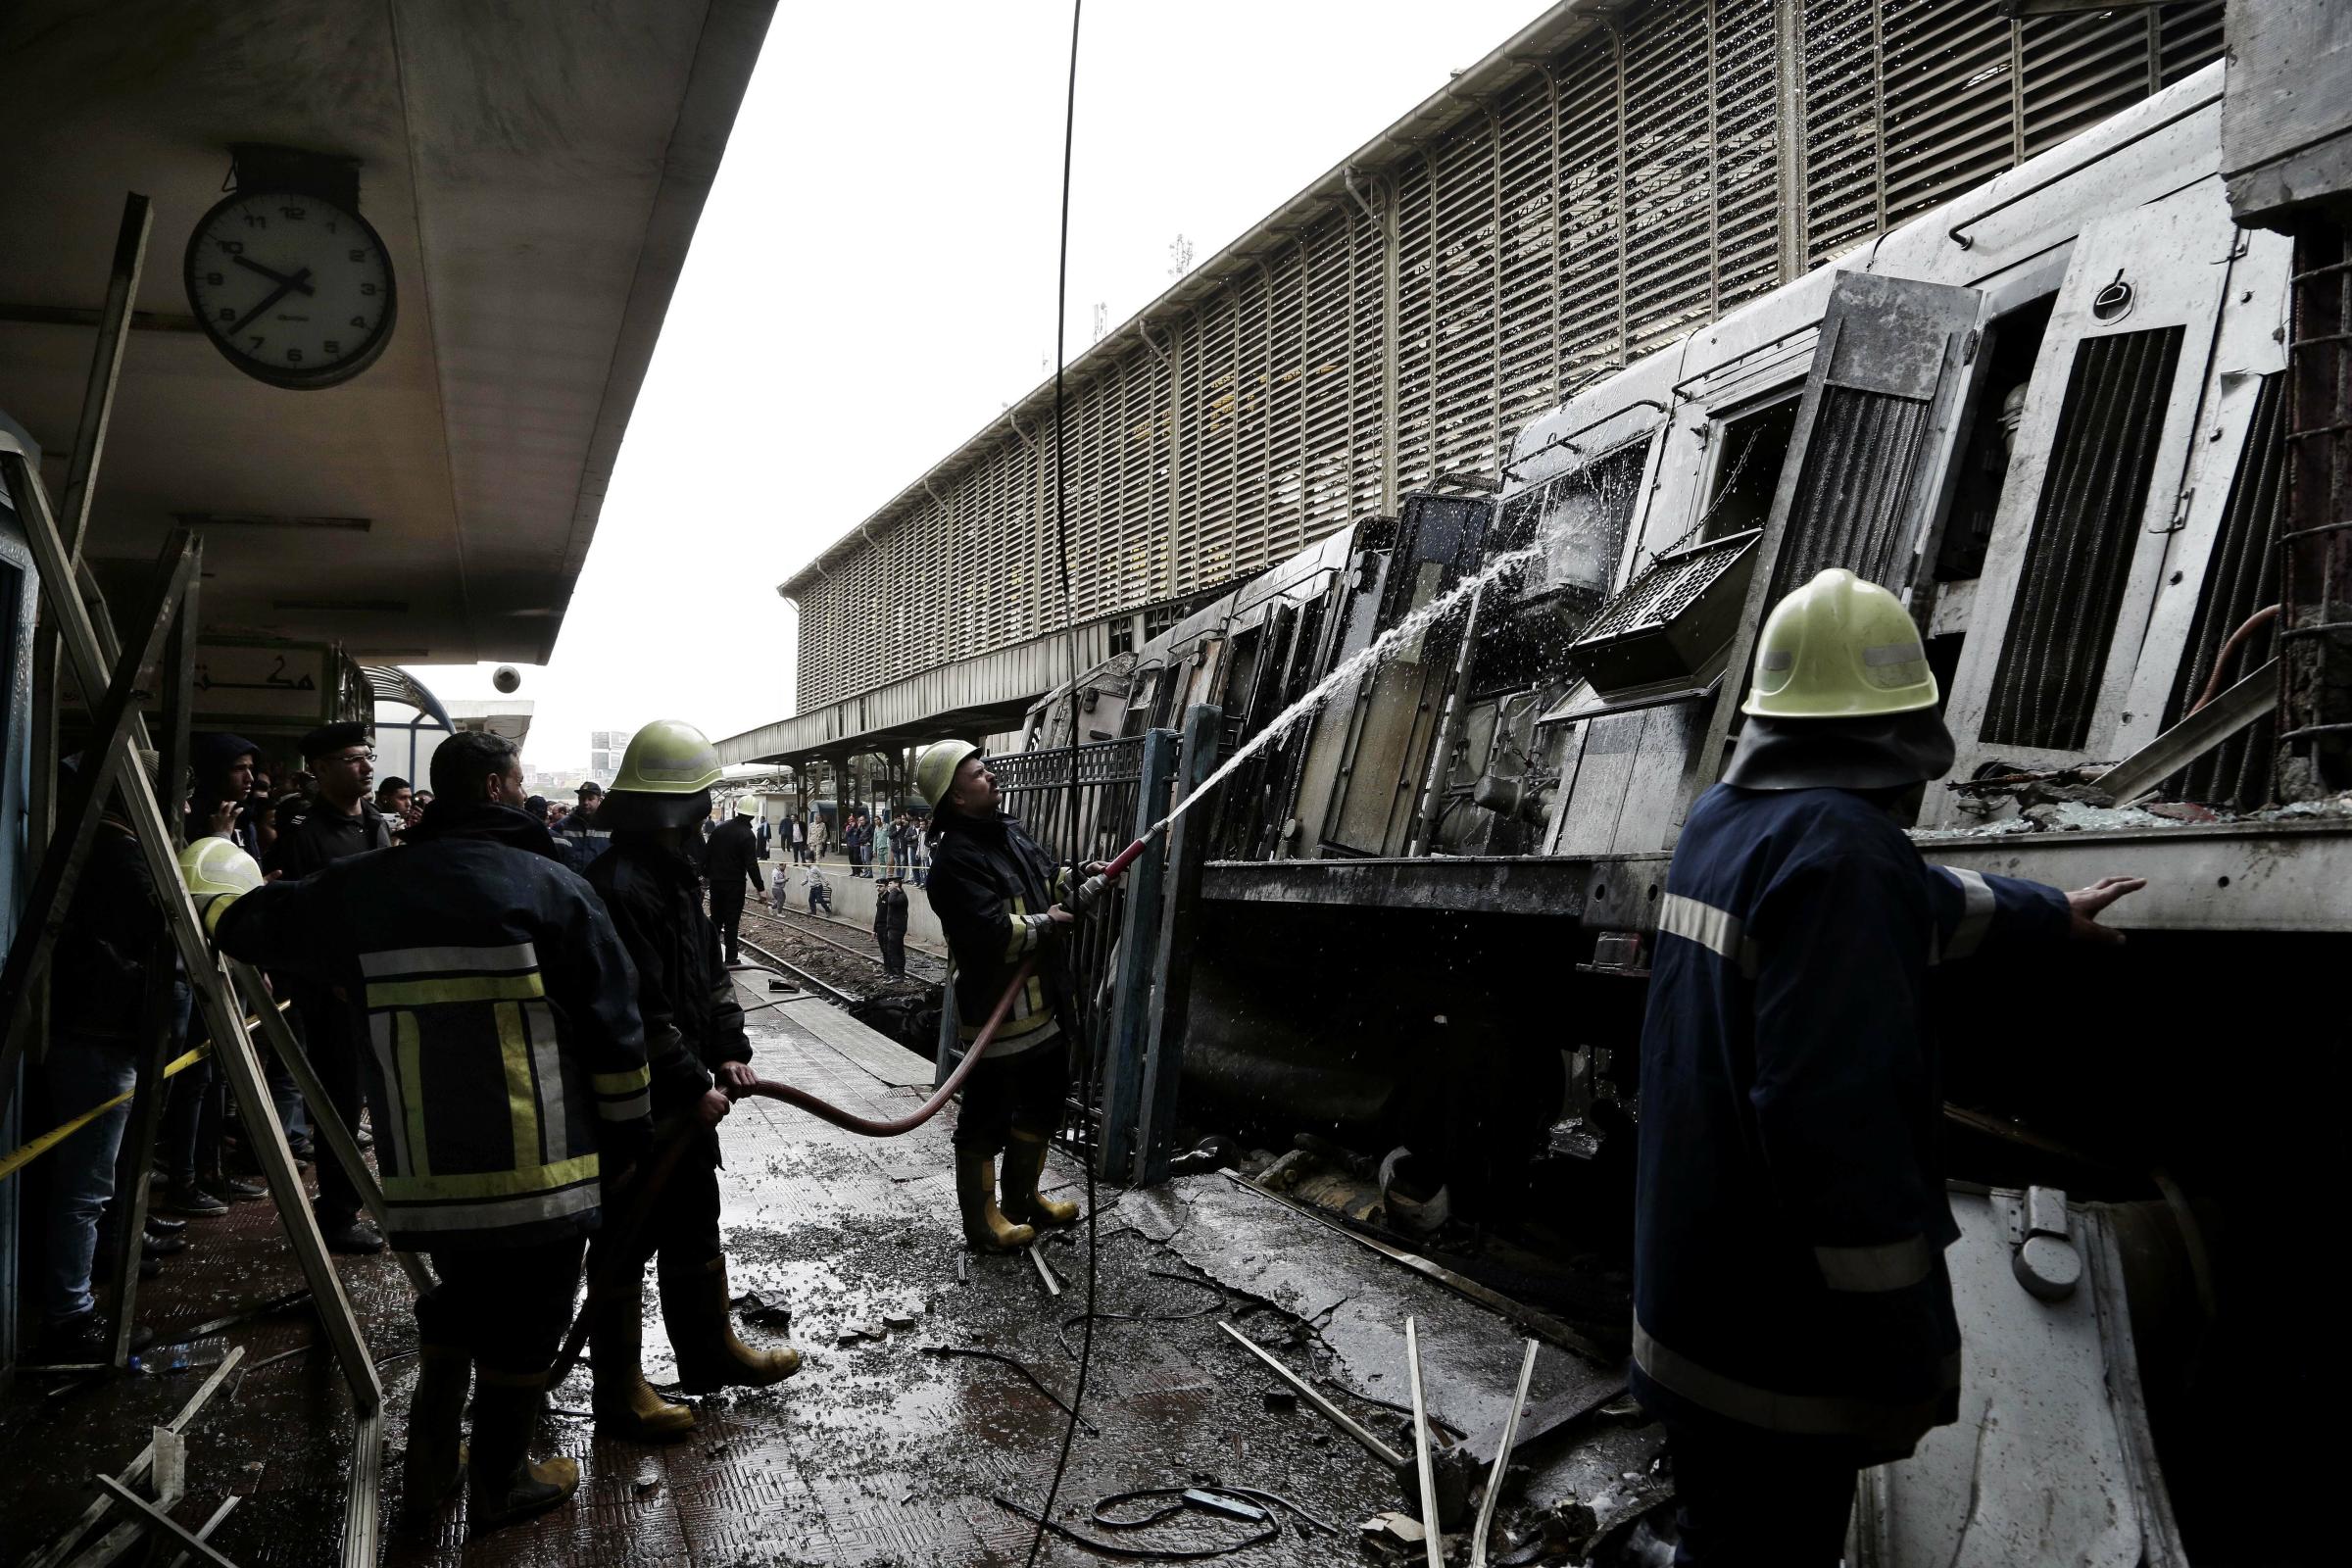  Firefighters hose down a train that was damaged after a crash inside Ramsis train station in Cairo. 